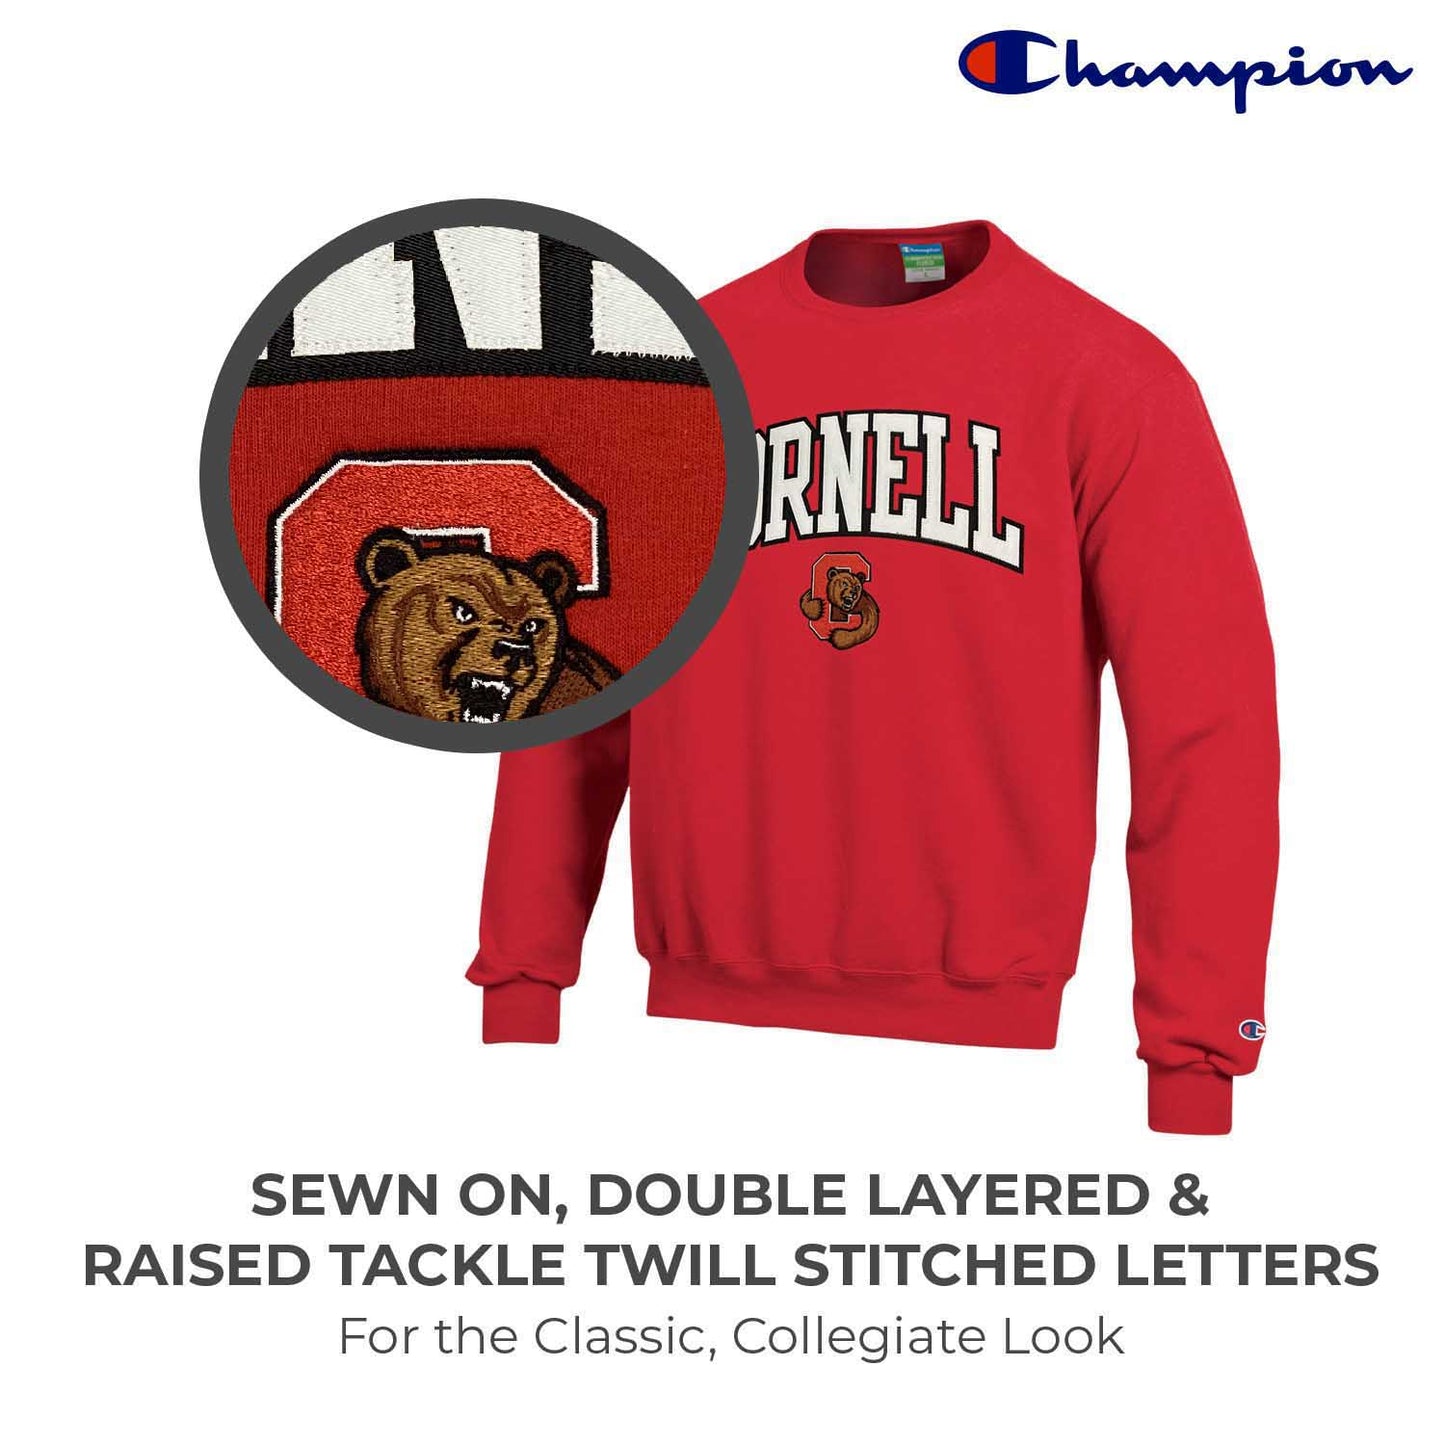 Cornell Big Red Adult Tackle Twill Crewneck - Red